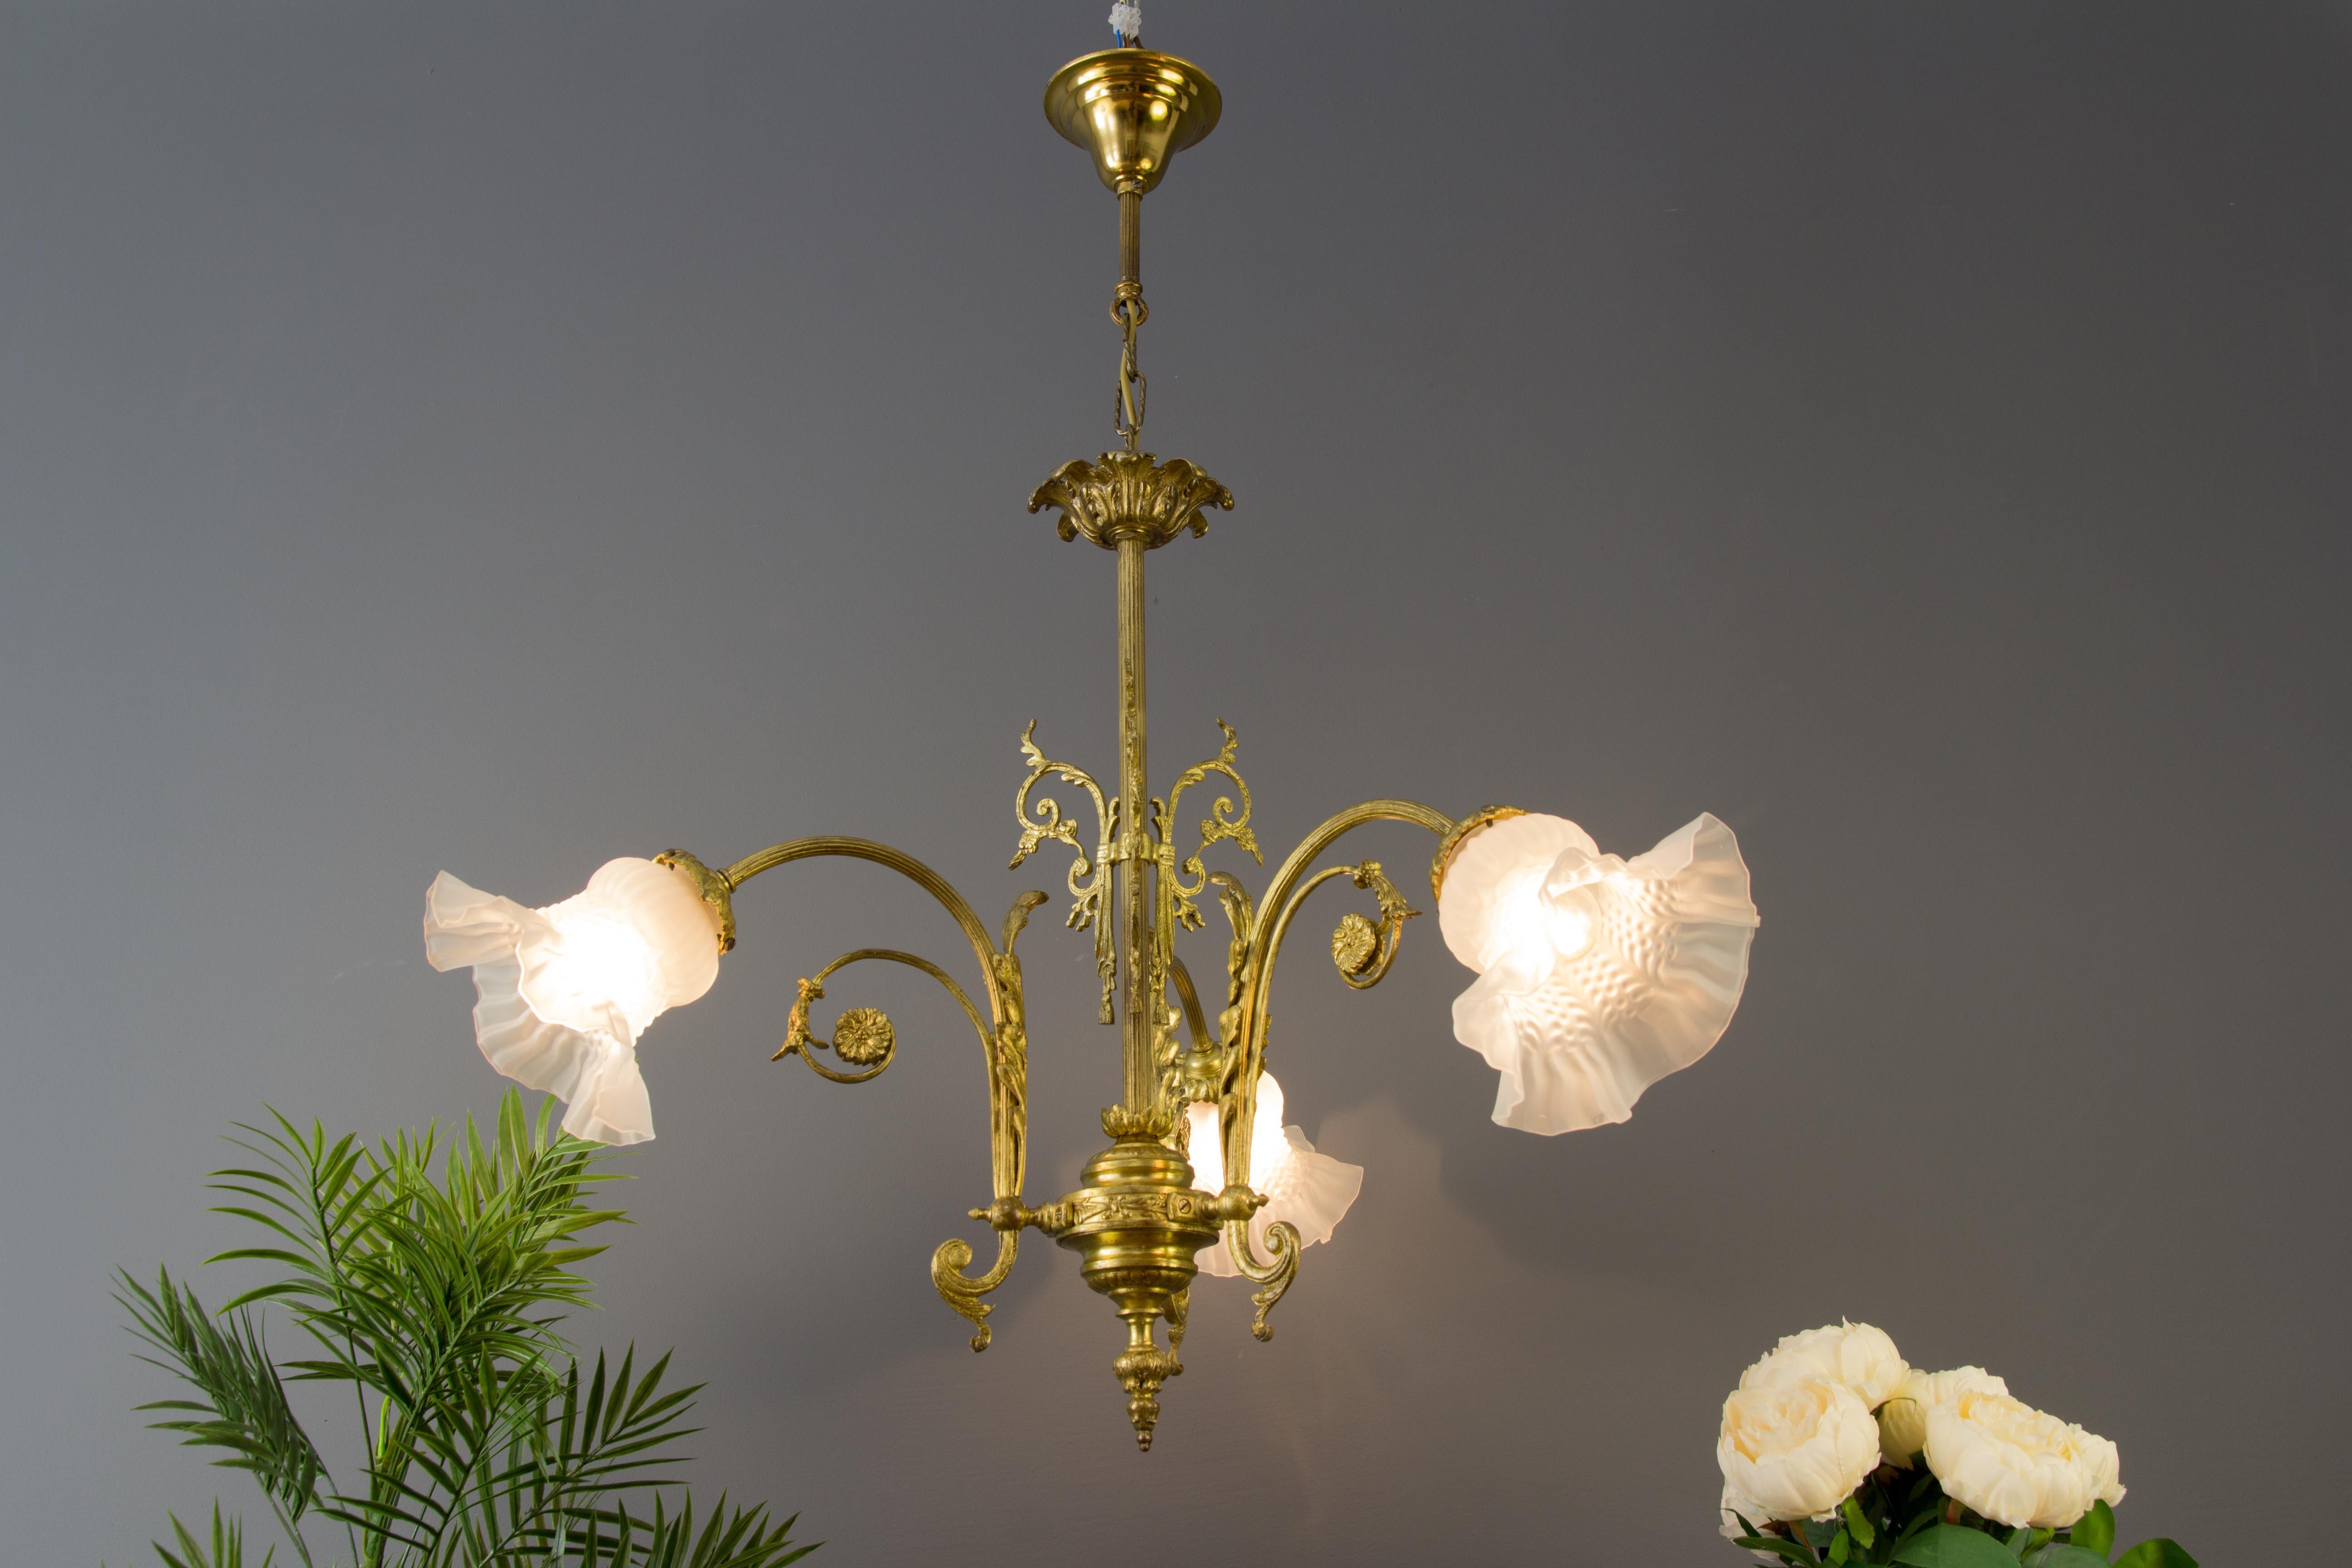 Lovely French Louis XVI style bronze and brass chandelier with three bronze arms each with frosted glass lamp shade and a socket for E27 light. France, 1920s.
Measures: Diameter: 80 cm / 31.49 in, diameter without glass shades: 50 cm / 19.68 in,